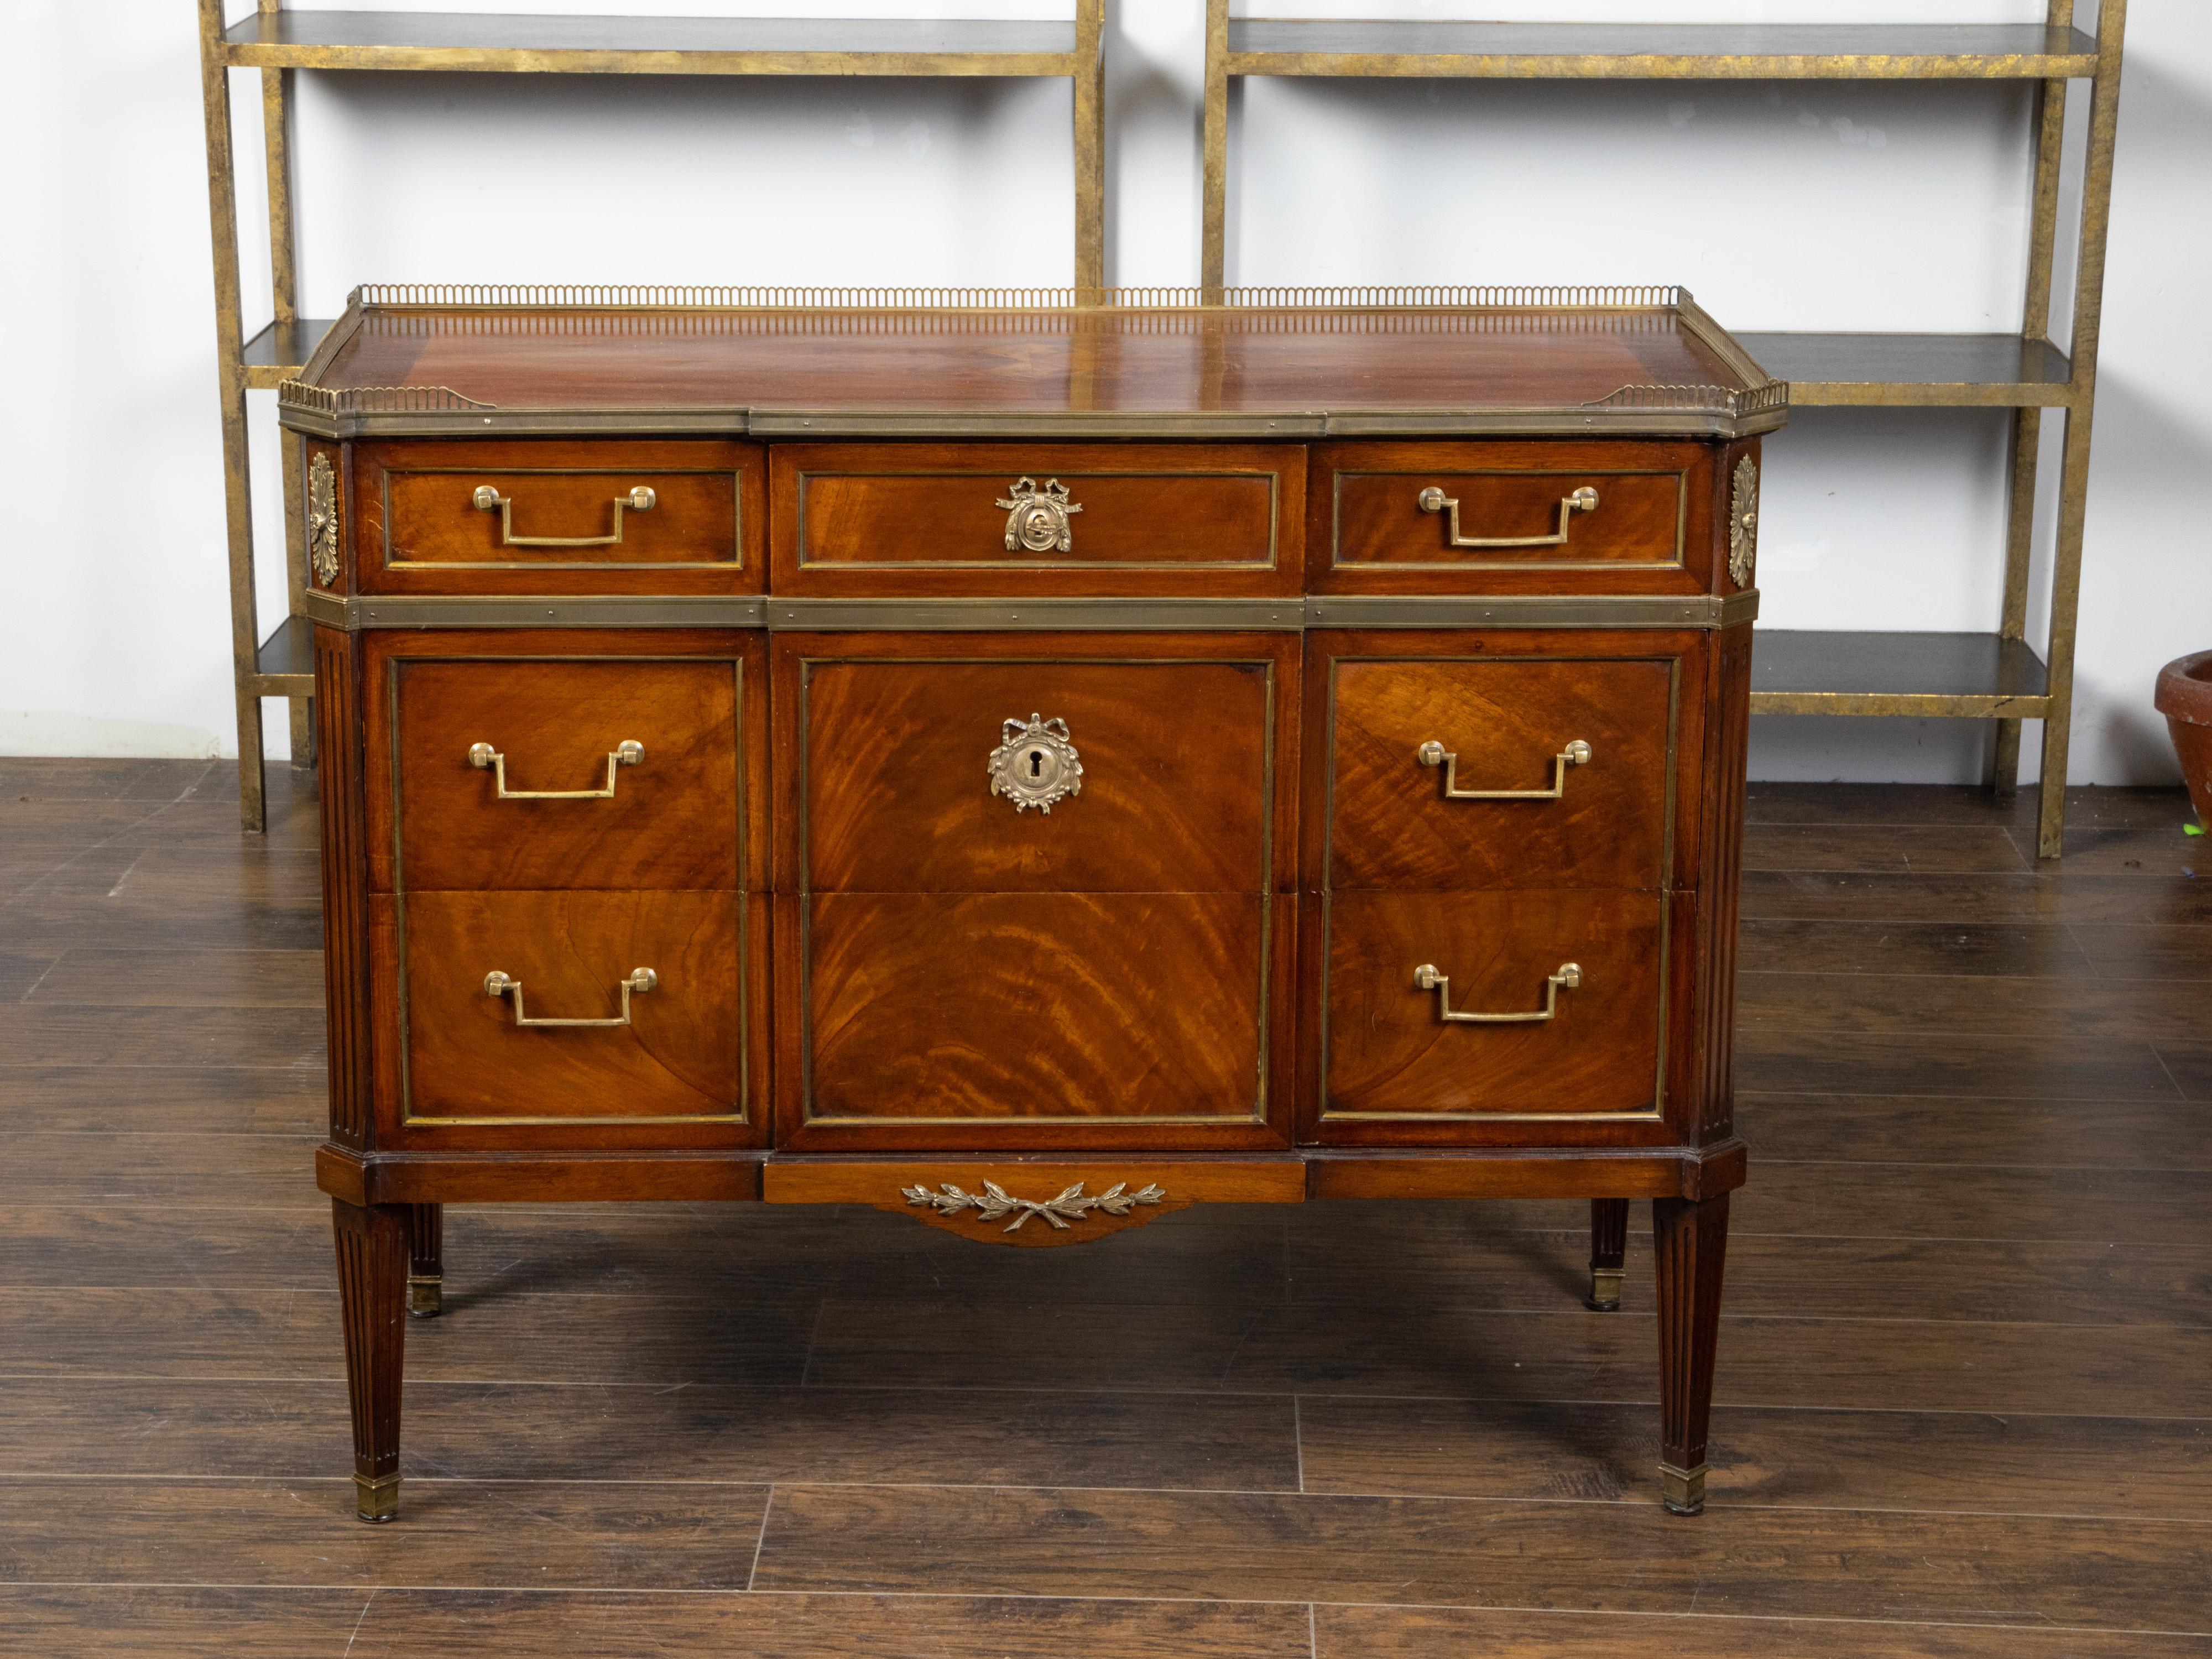 A French mahogany five drawer commode from the early 20th century, with bronze accents. Created in France during the first quarter of the 20th century, this mahogany commode features a rectangular top with butterfly veneer and three-quarter pierced